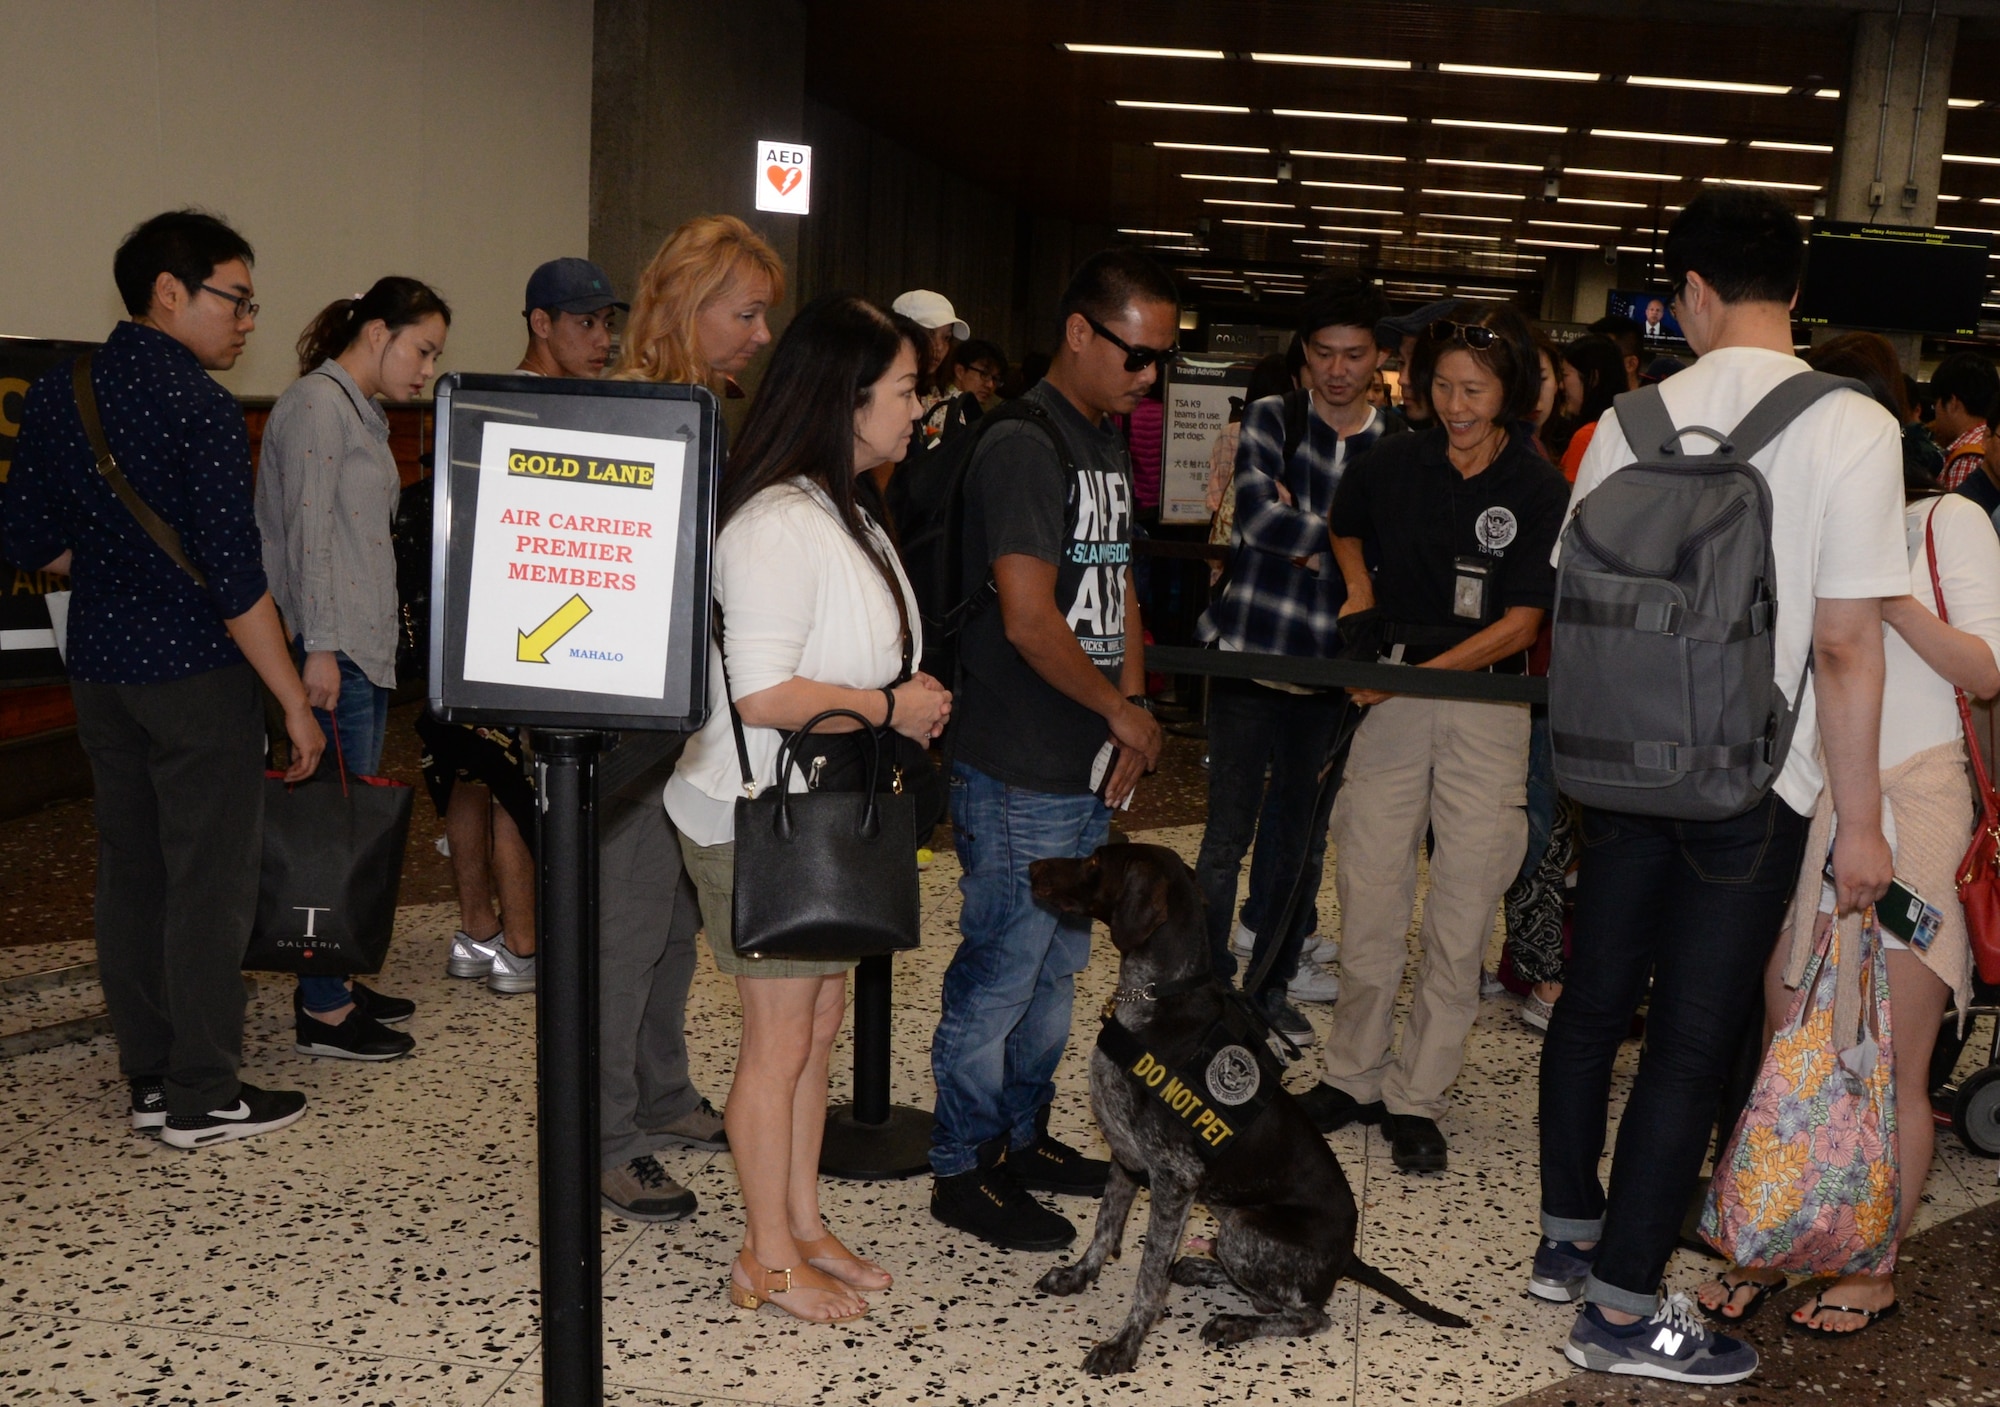 U.S. Air Force Master Sgt. Marilyn Kinoshita, a member of the 624th Regional Support Group based out of Joint Base Pearl Harbor-Hickam, Hawaii, participates in a training scenario for Zip, a TSA explosive detection dog, who is sniffing around to locate the traveling passenger carrying explosive material through the security line at the Honolulu International Airport, Hawaii, Nov. 17, 2016. Located on Oahu and Guam, and a component of the Air Force Reserve, the 624th RSG's mission is to deliver mission essential capability through combat readiness, quality management and peacetime deployments in the Pacific area of responsibility. (U.S. Air Force photo by Master Sgt. Theanne Herrmann)